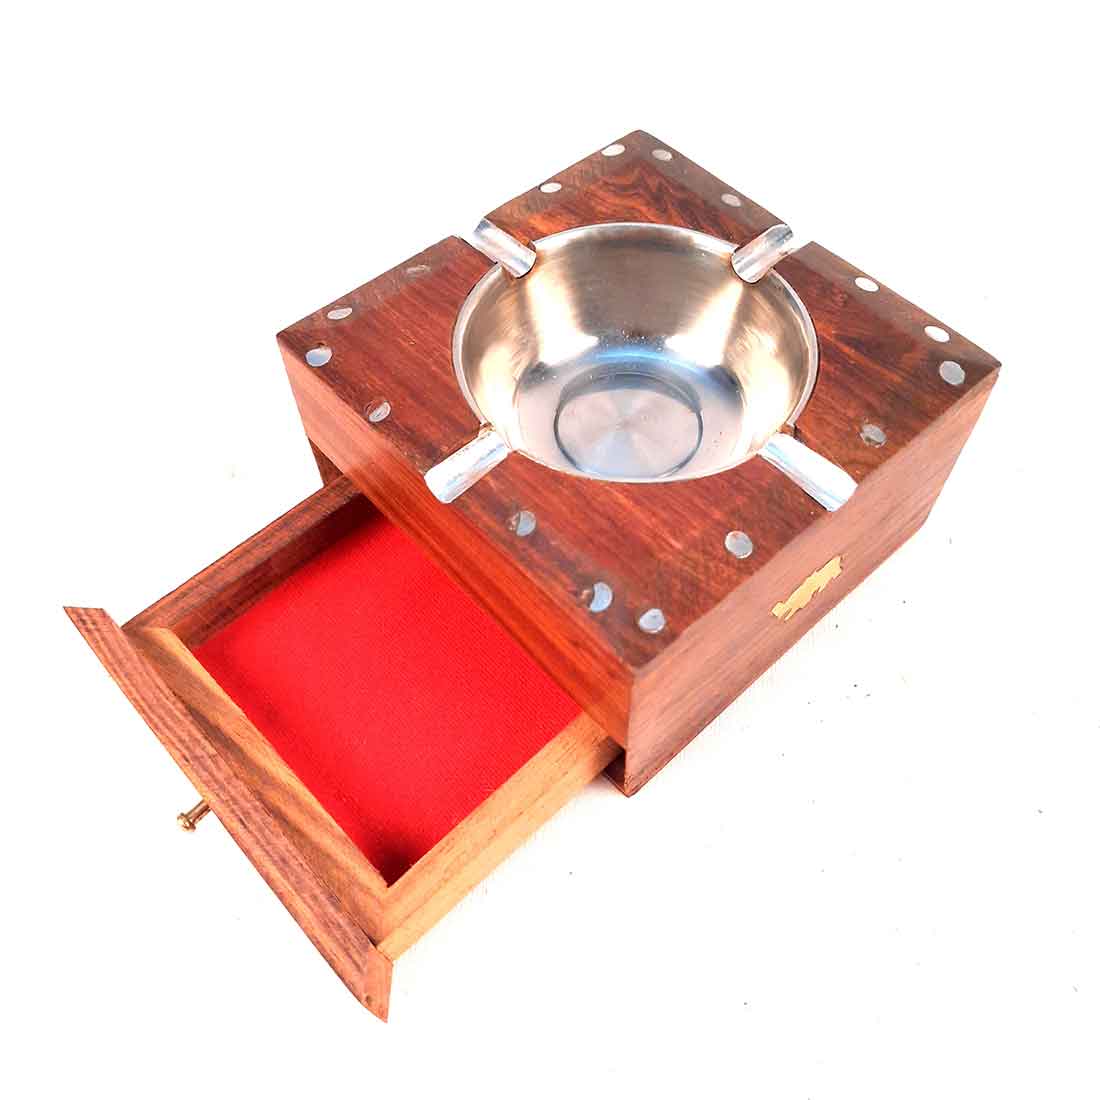 Wooden Decorative Ashtray with Small Storage - for Home, Car, Garden & Bar - 4 Inch - ApkaMart